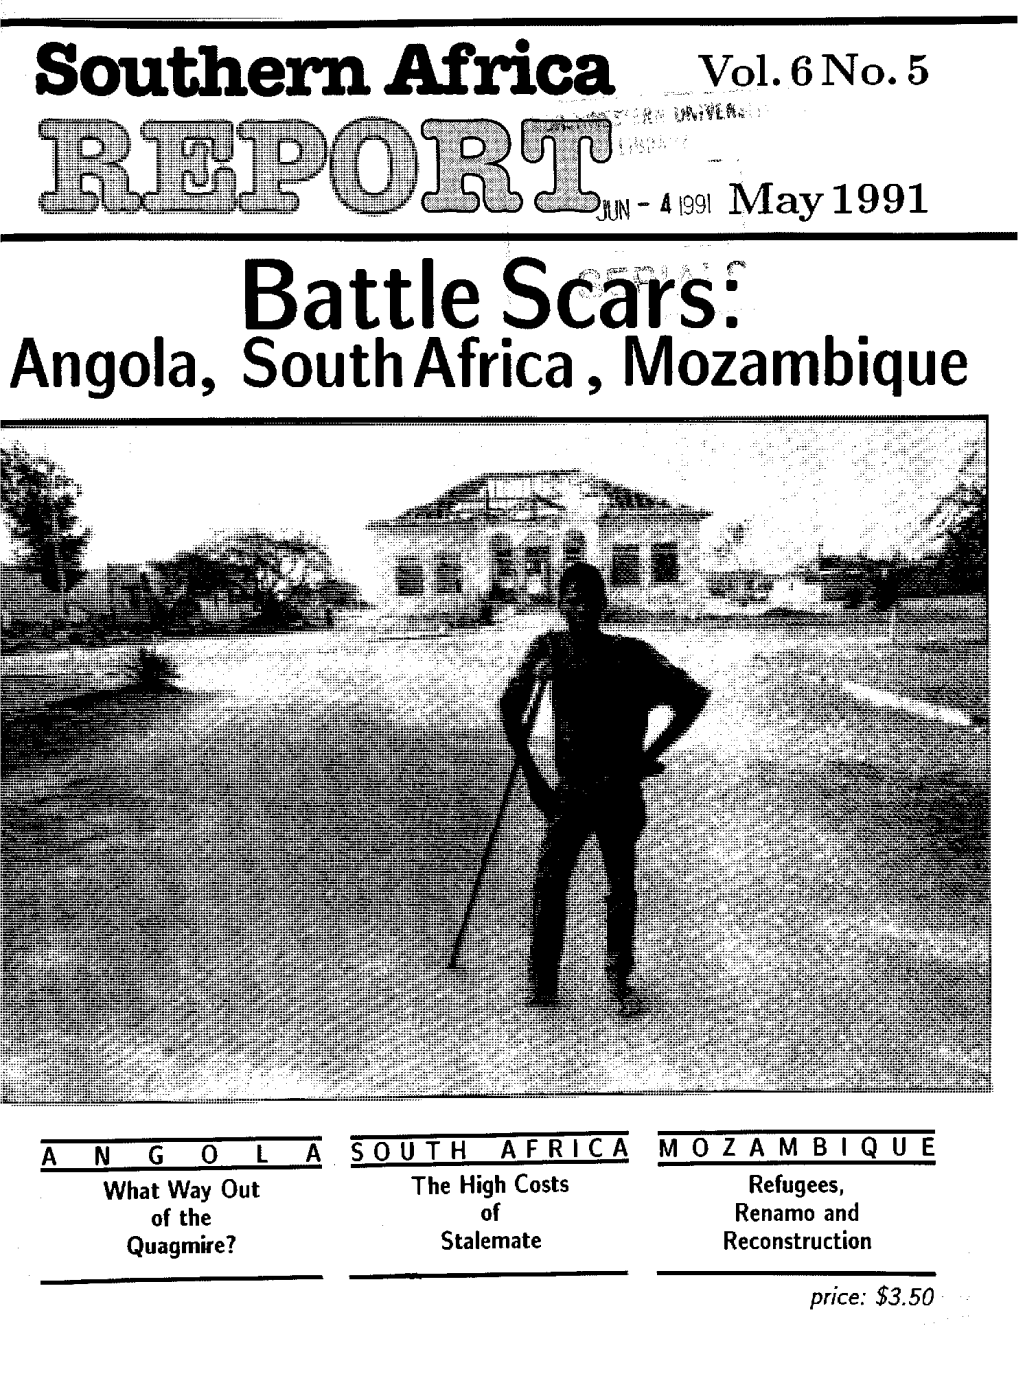 Battle Scars: Angola, South Africa, Mozambique